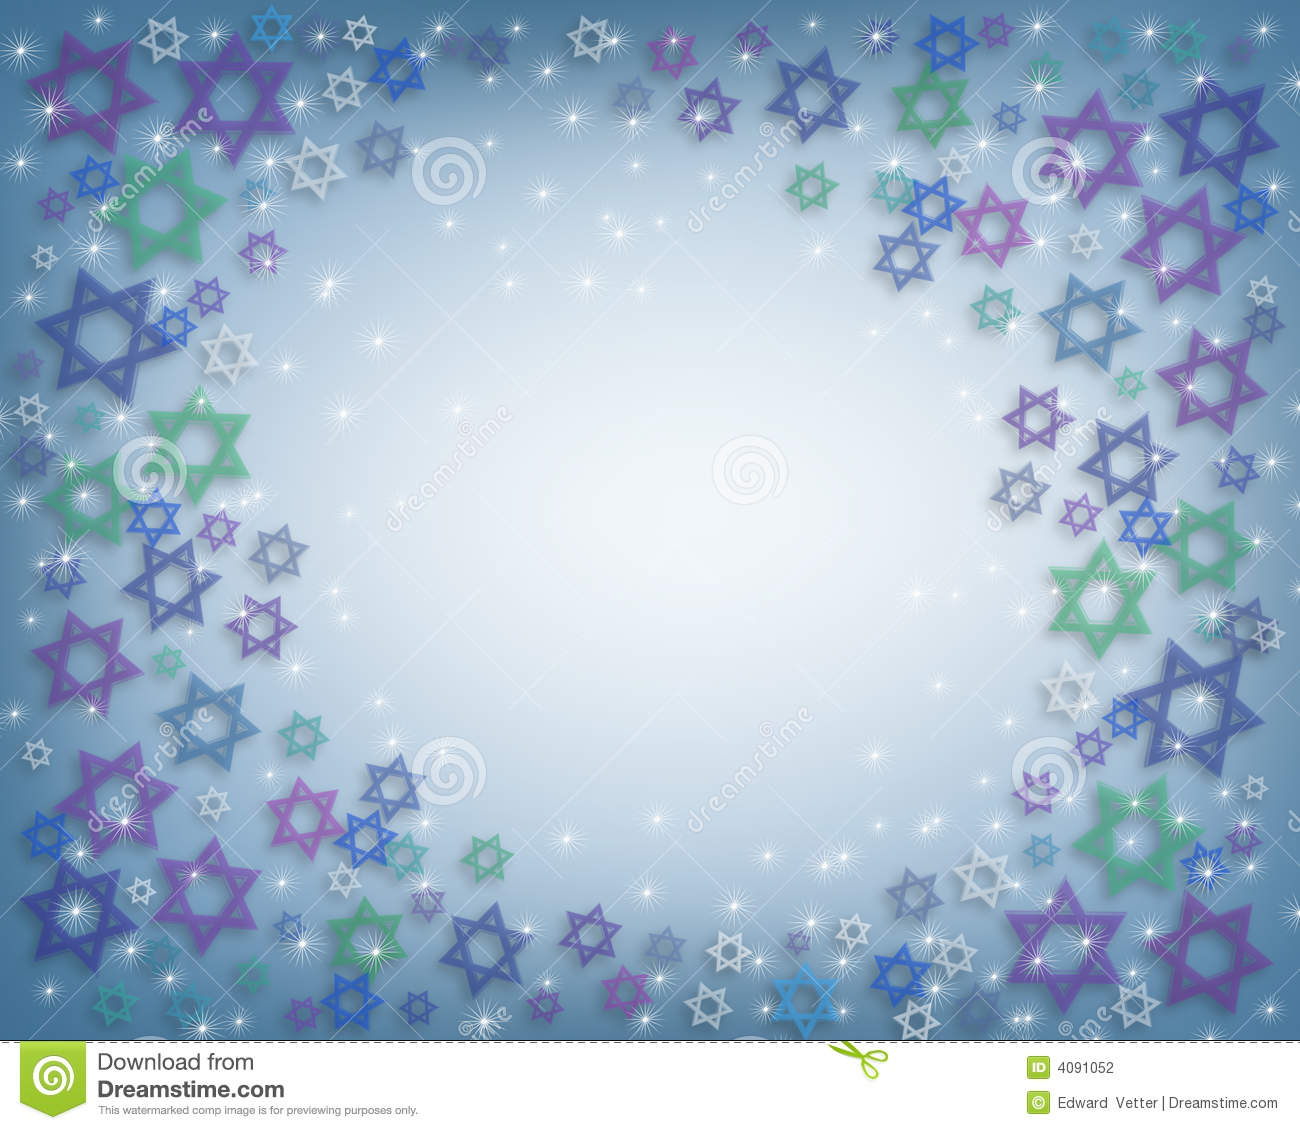 Illustrated Background Border Or Frame For Hanukkah With Jewish Stars